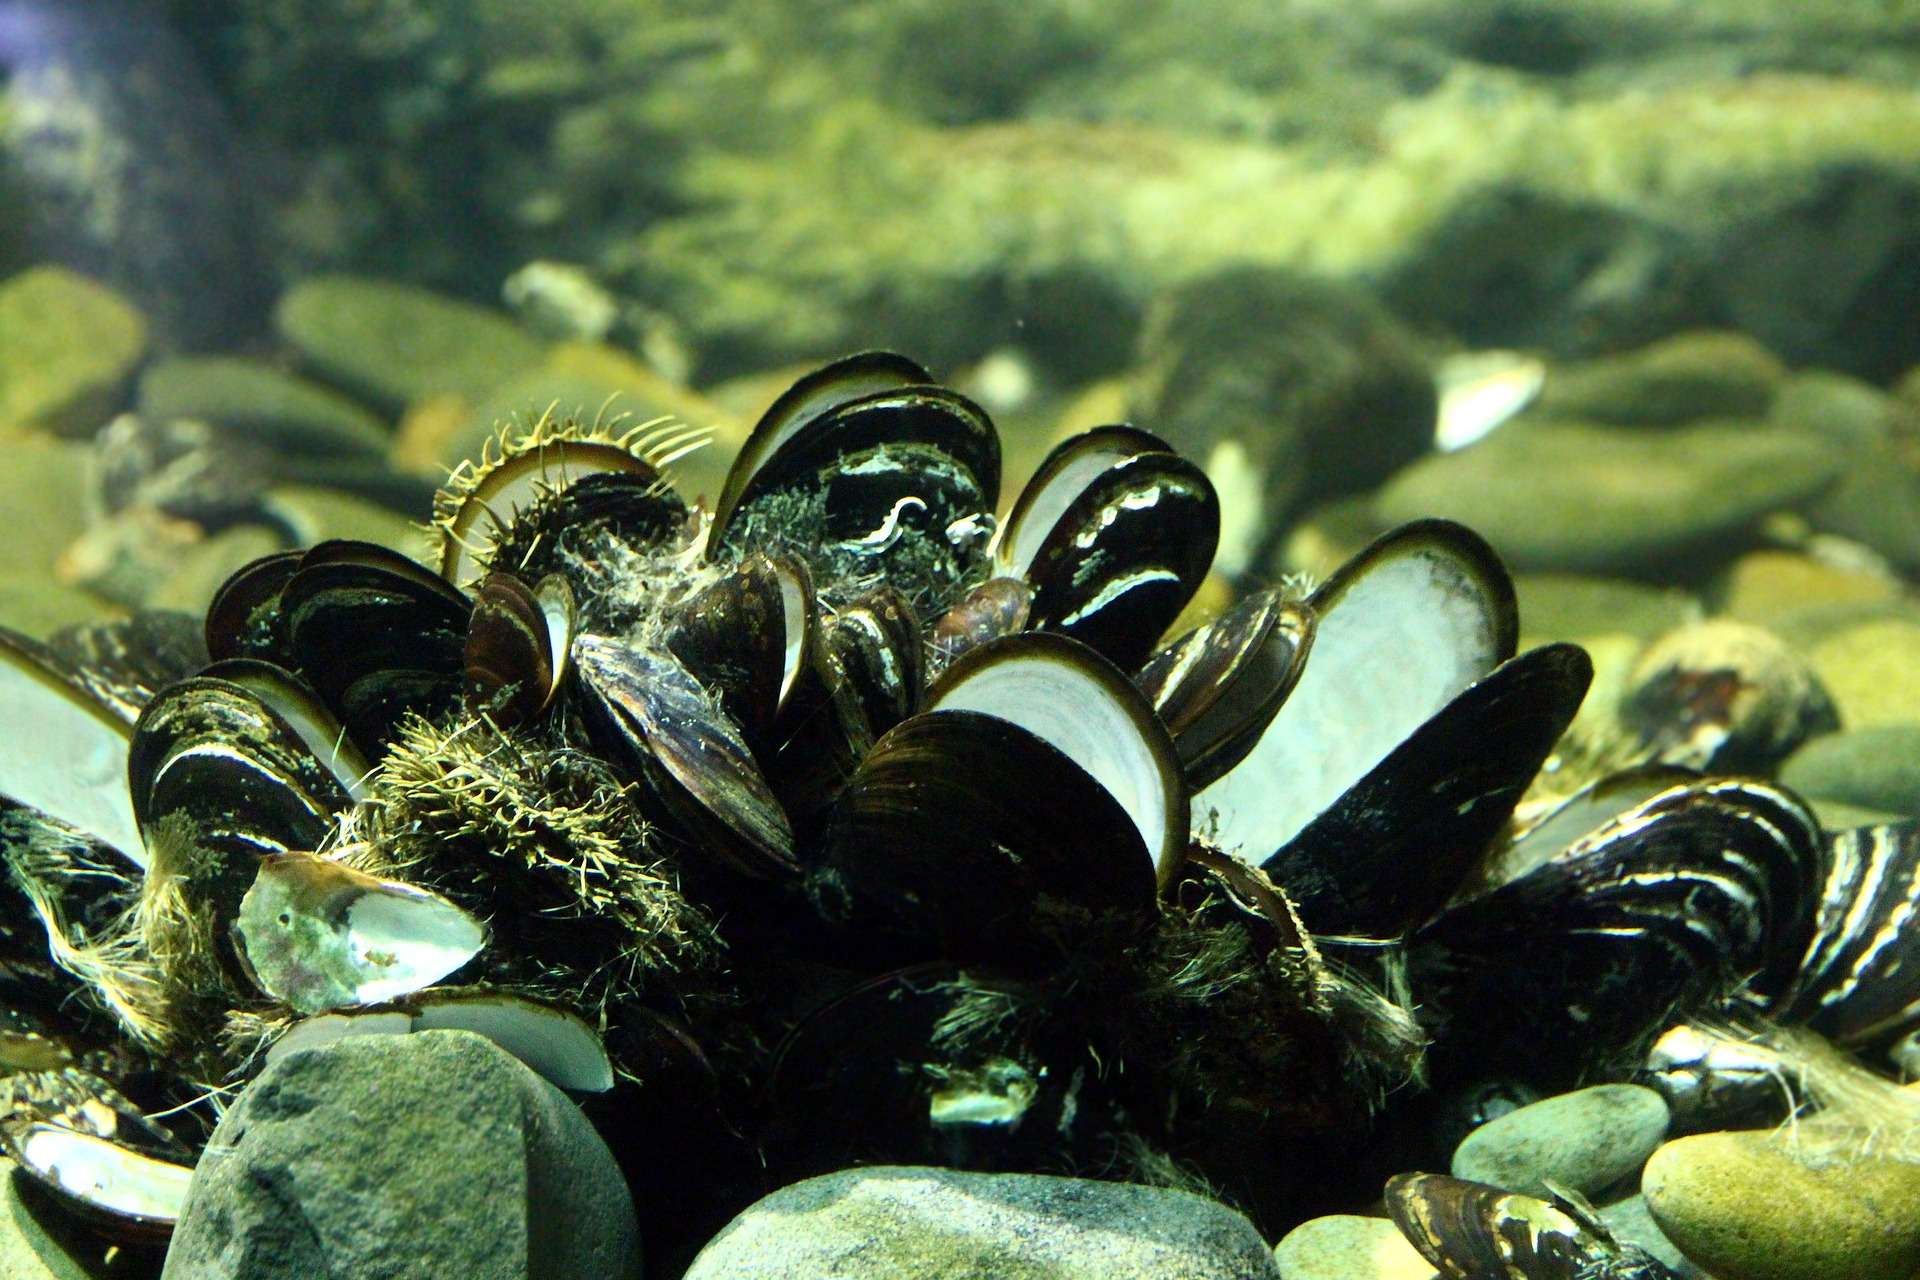 Marine species are sensitive indicators of environmental and climate changes. 